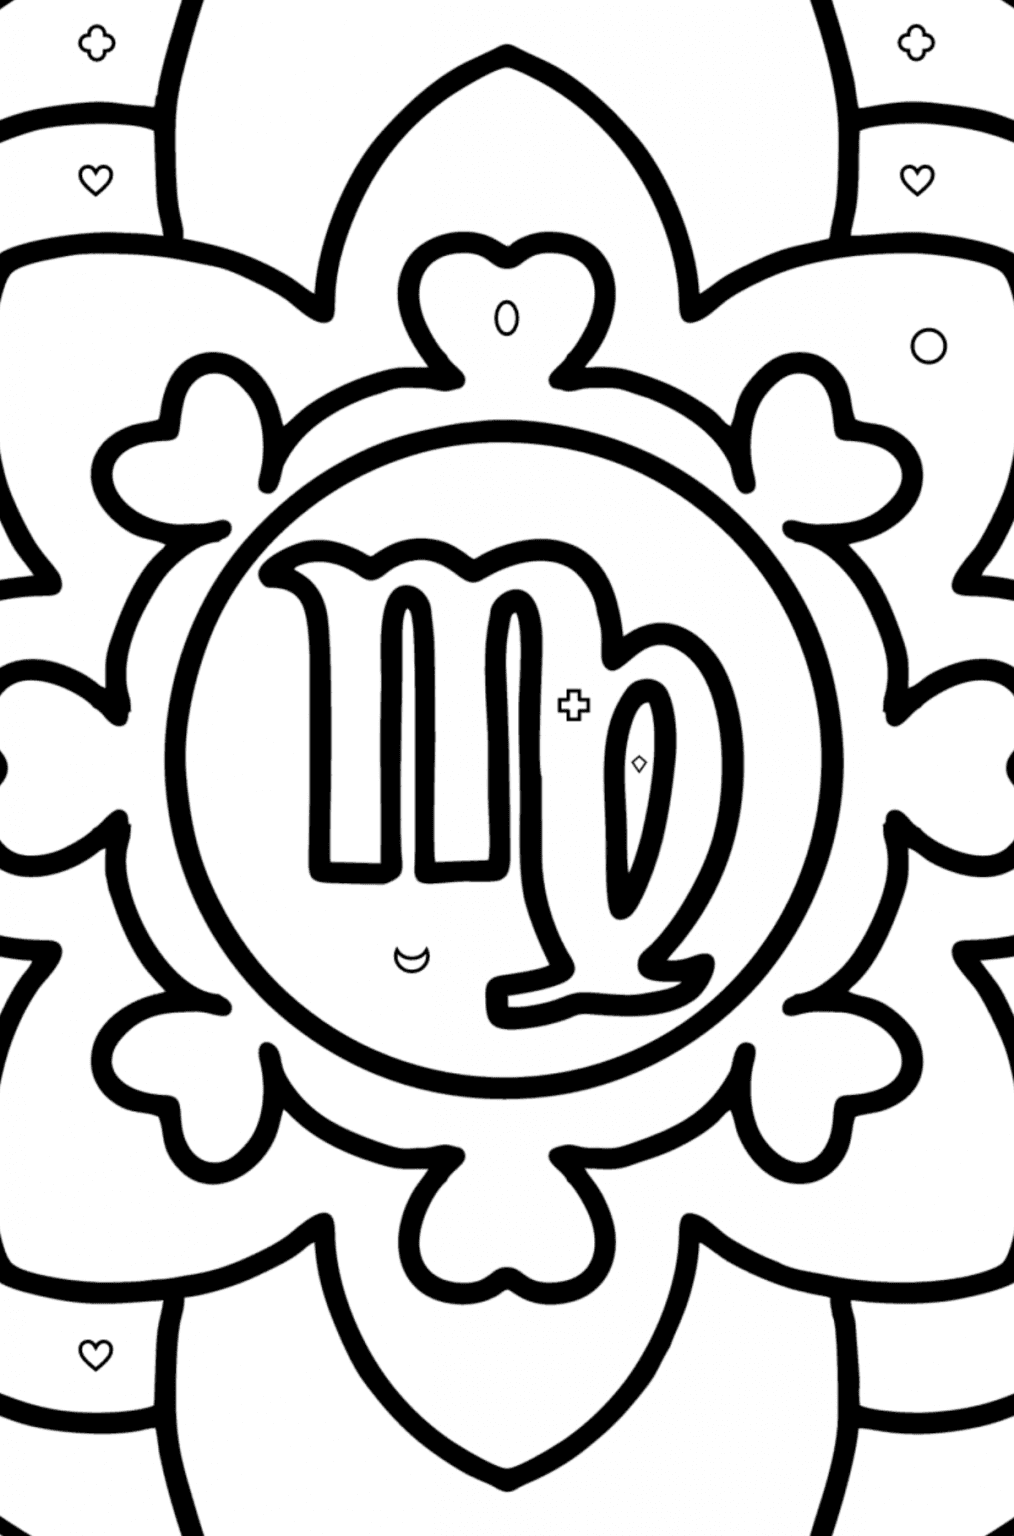 Coloring page - zodiac sign Virgo ♥ Online and Print for Free!